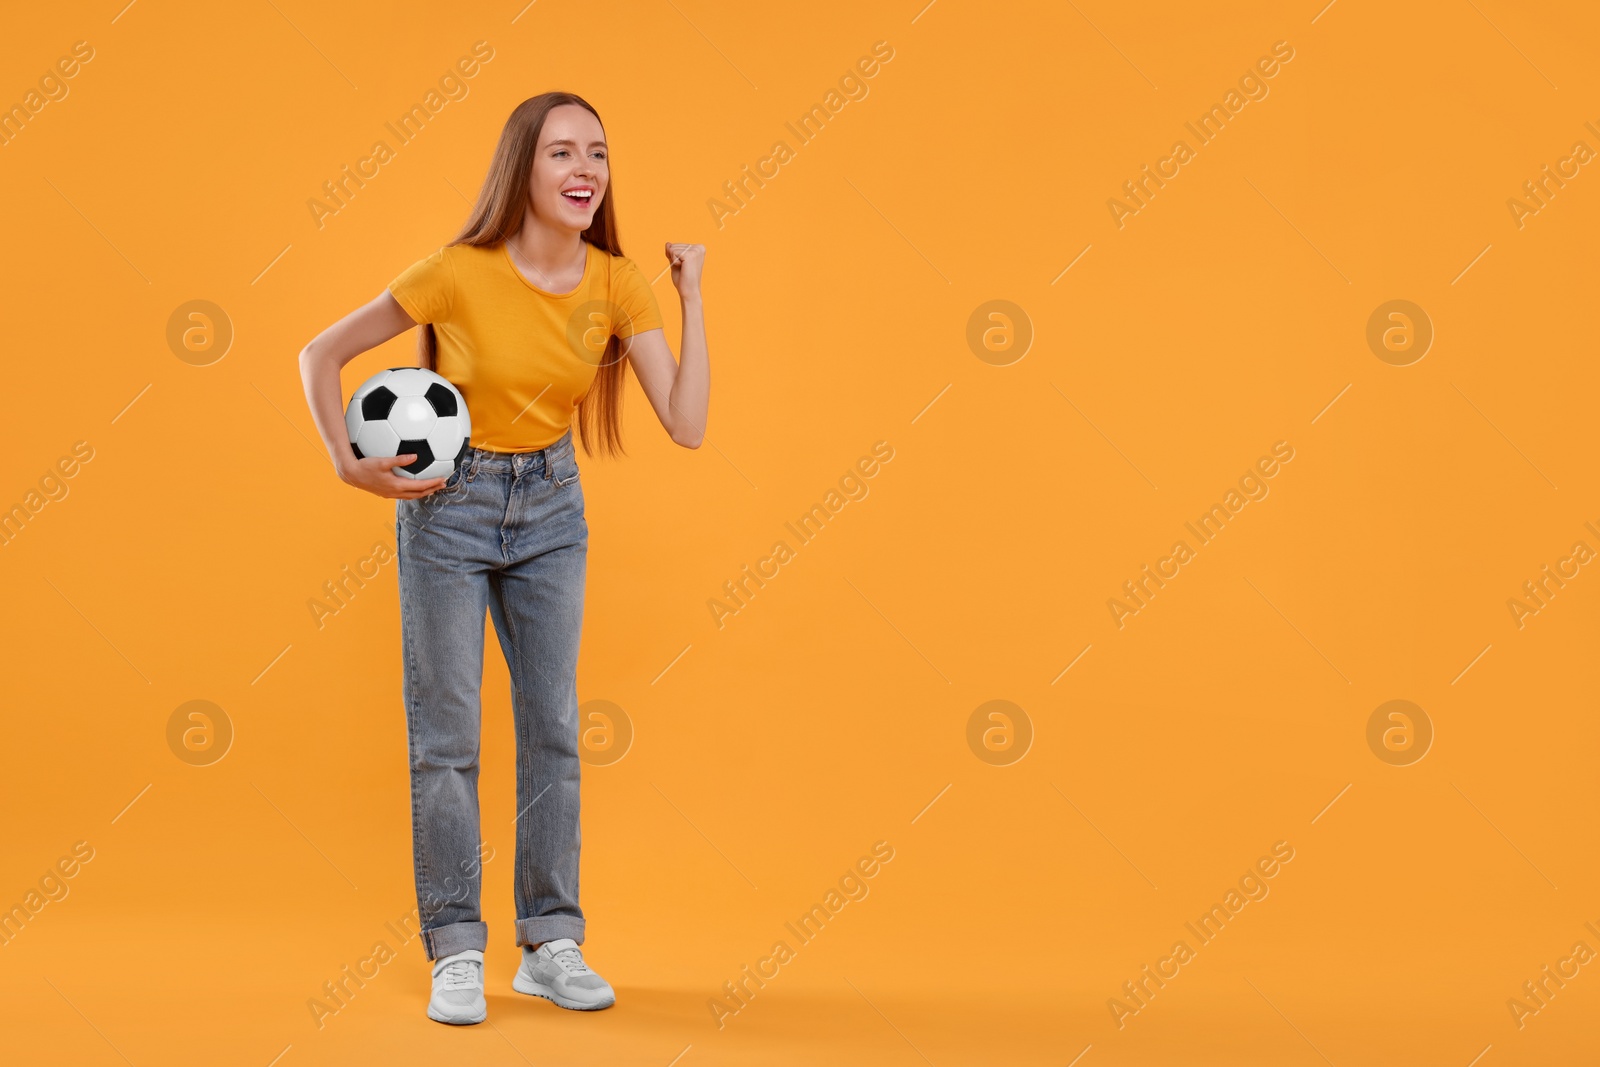 Photo of Emotional sports fan with ball on yellow background. Space for text